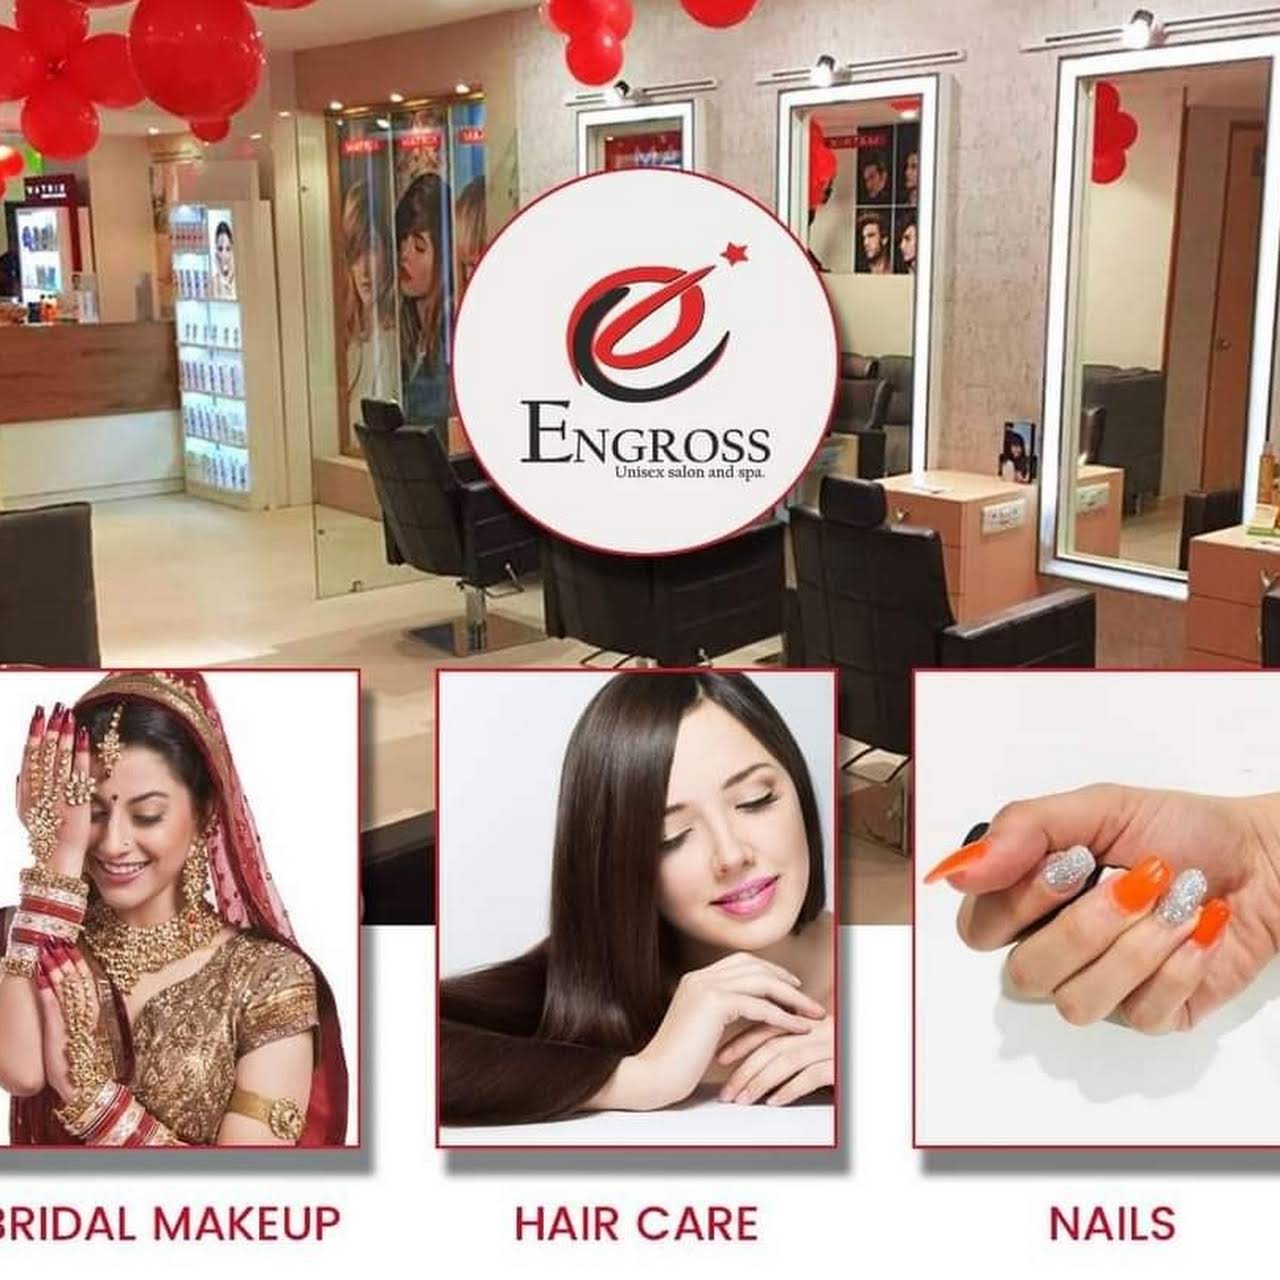 Engross Unisex Salon|Gym and Fitness Centre|Active Life